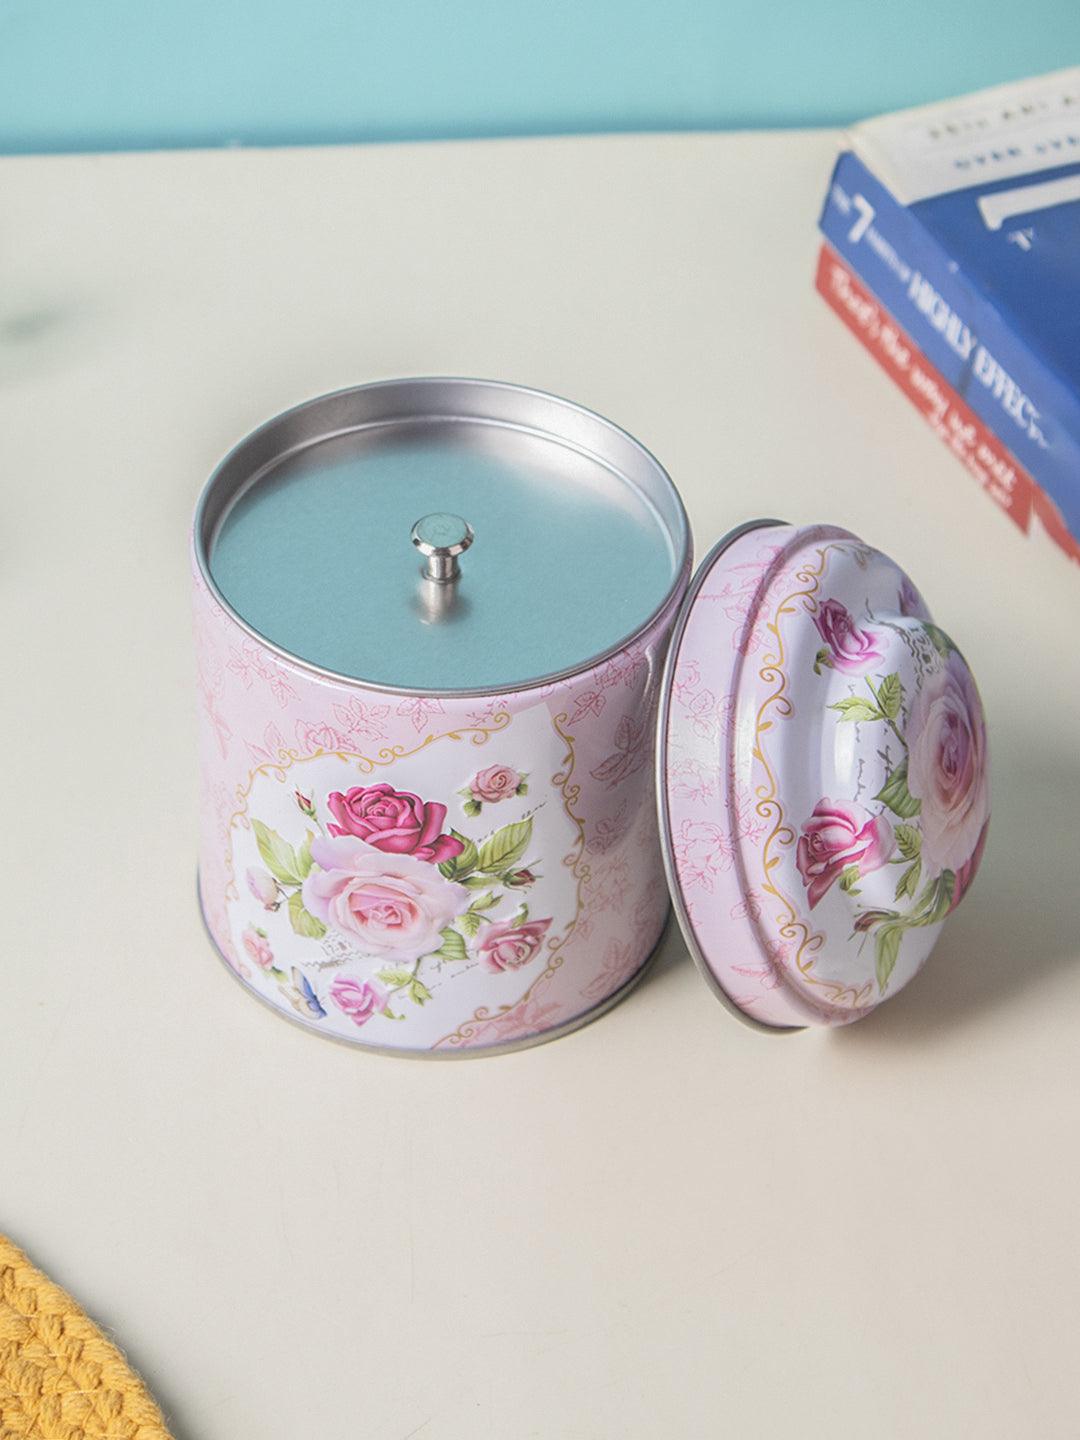 Floral Tin Storage Canister with Lid - Baby Pink